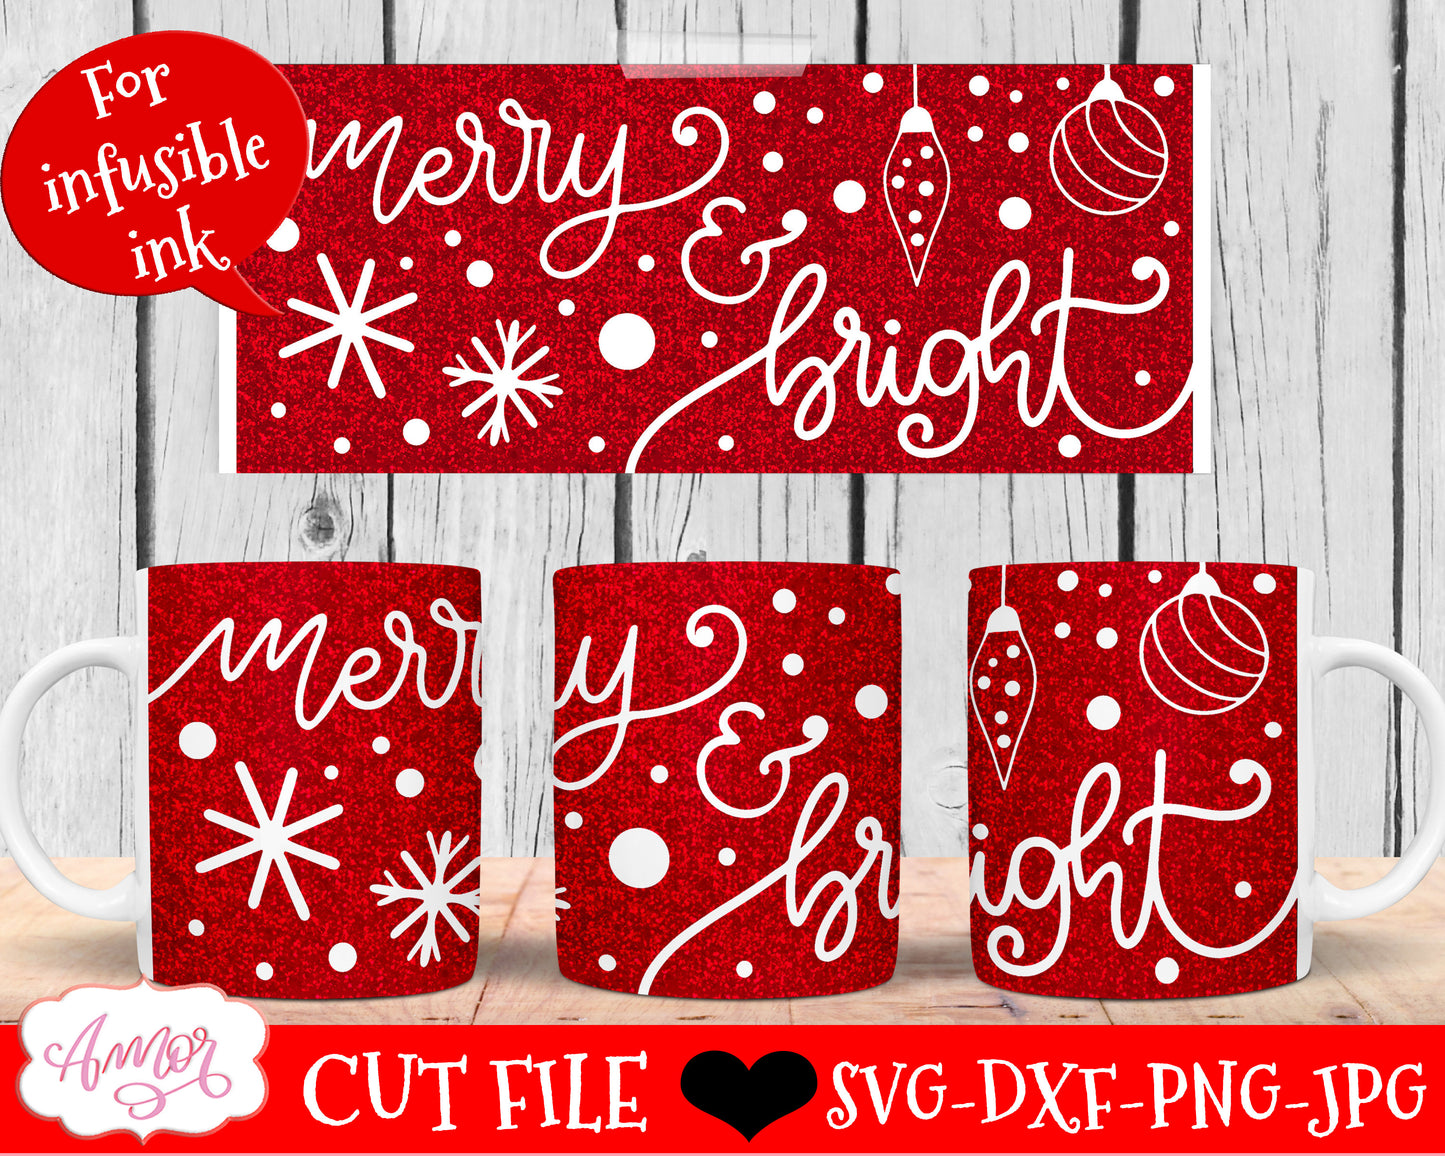 Merry and Bright Mug Wrap SVG for Cricut infusible ink 12oz